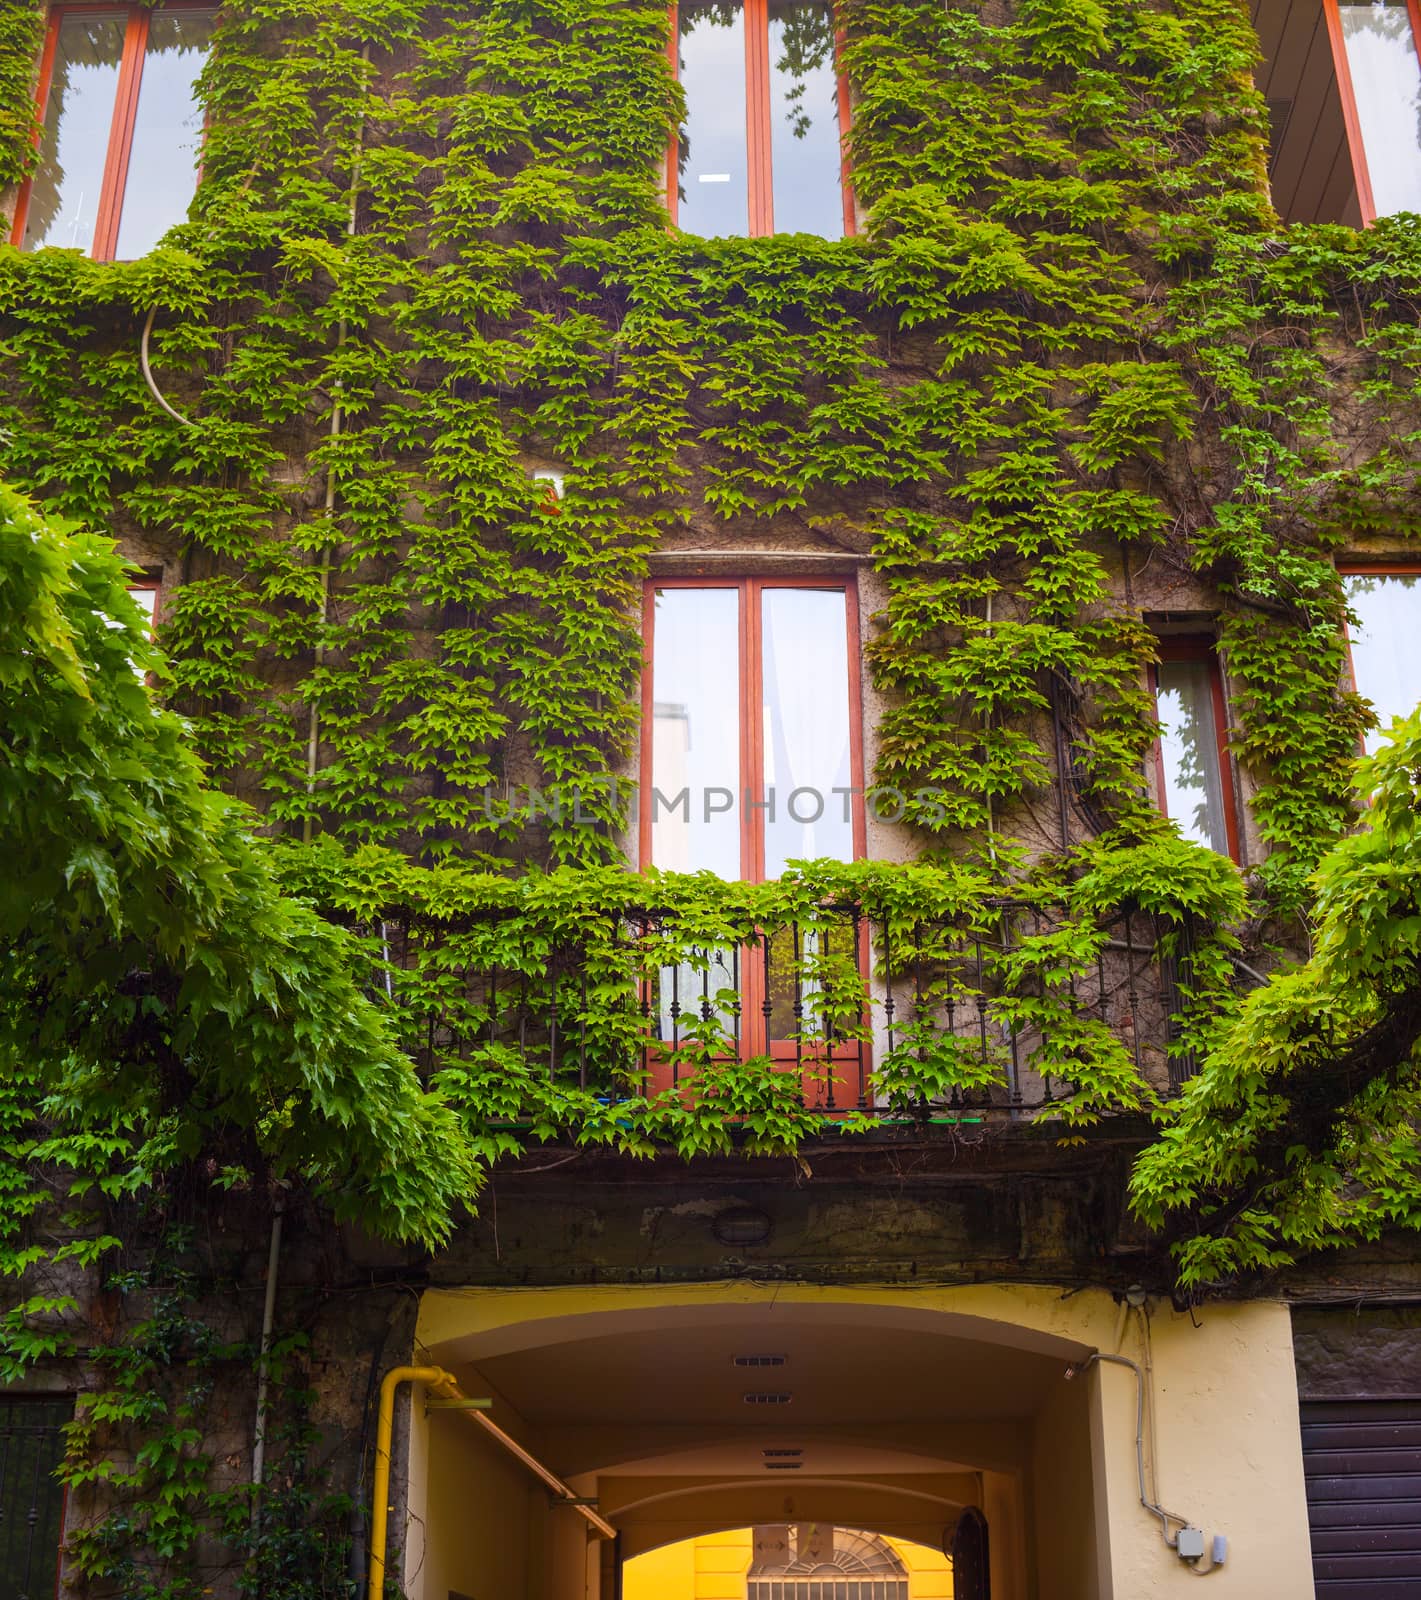 View of Italian house covered by ivy